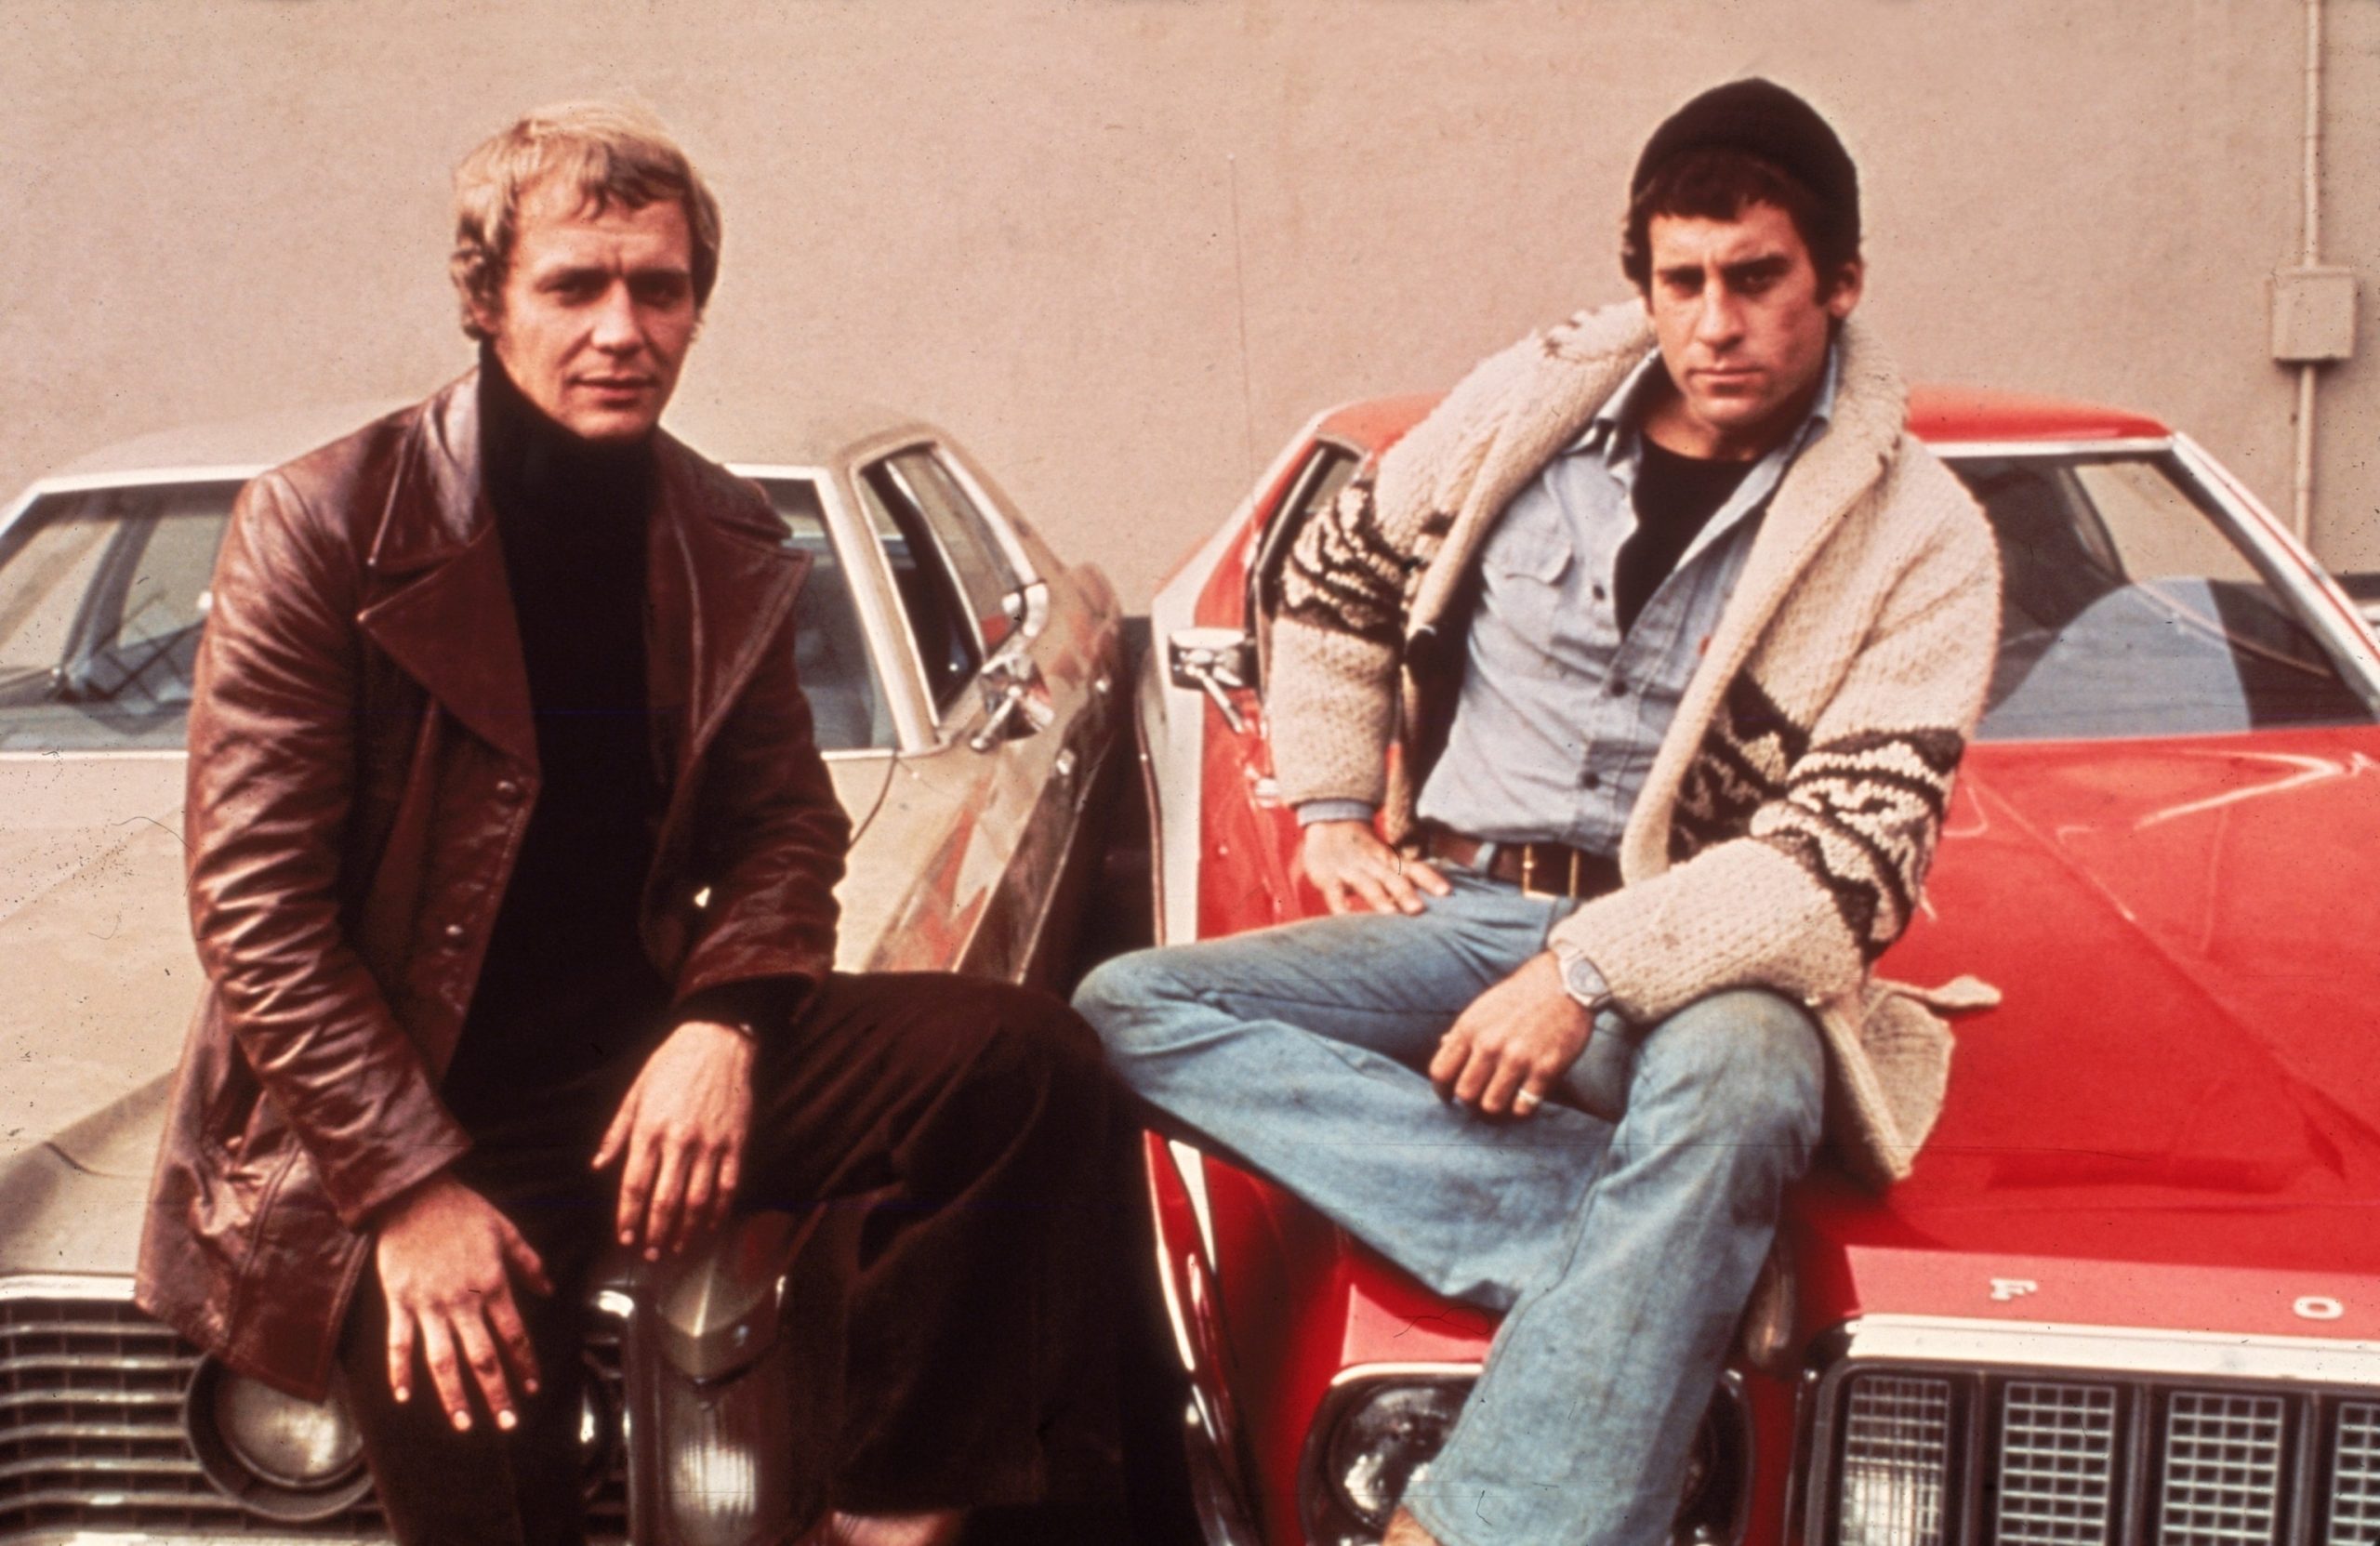 David Soul, renowned actor and one-half of the iconic 'Starsky & Hutch' duo, passes away at the age of 80